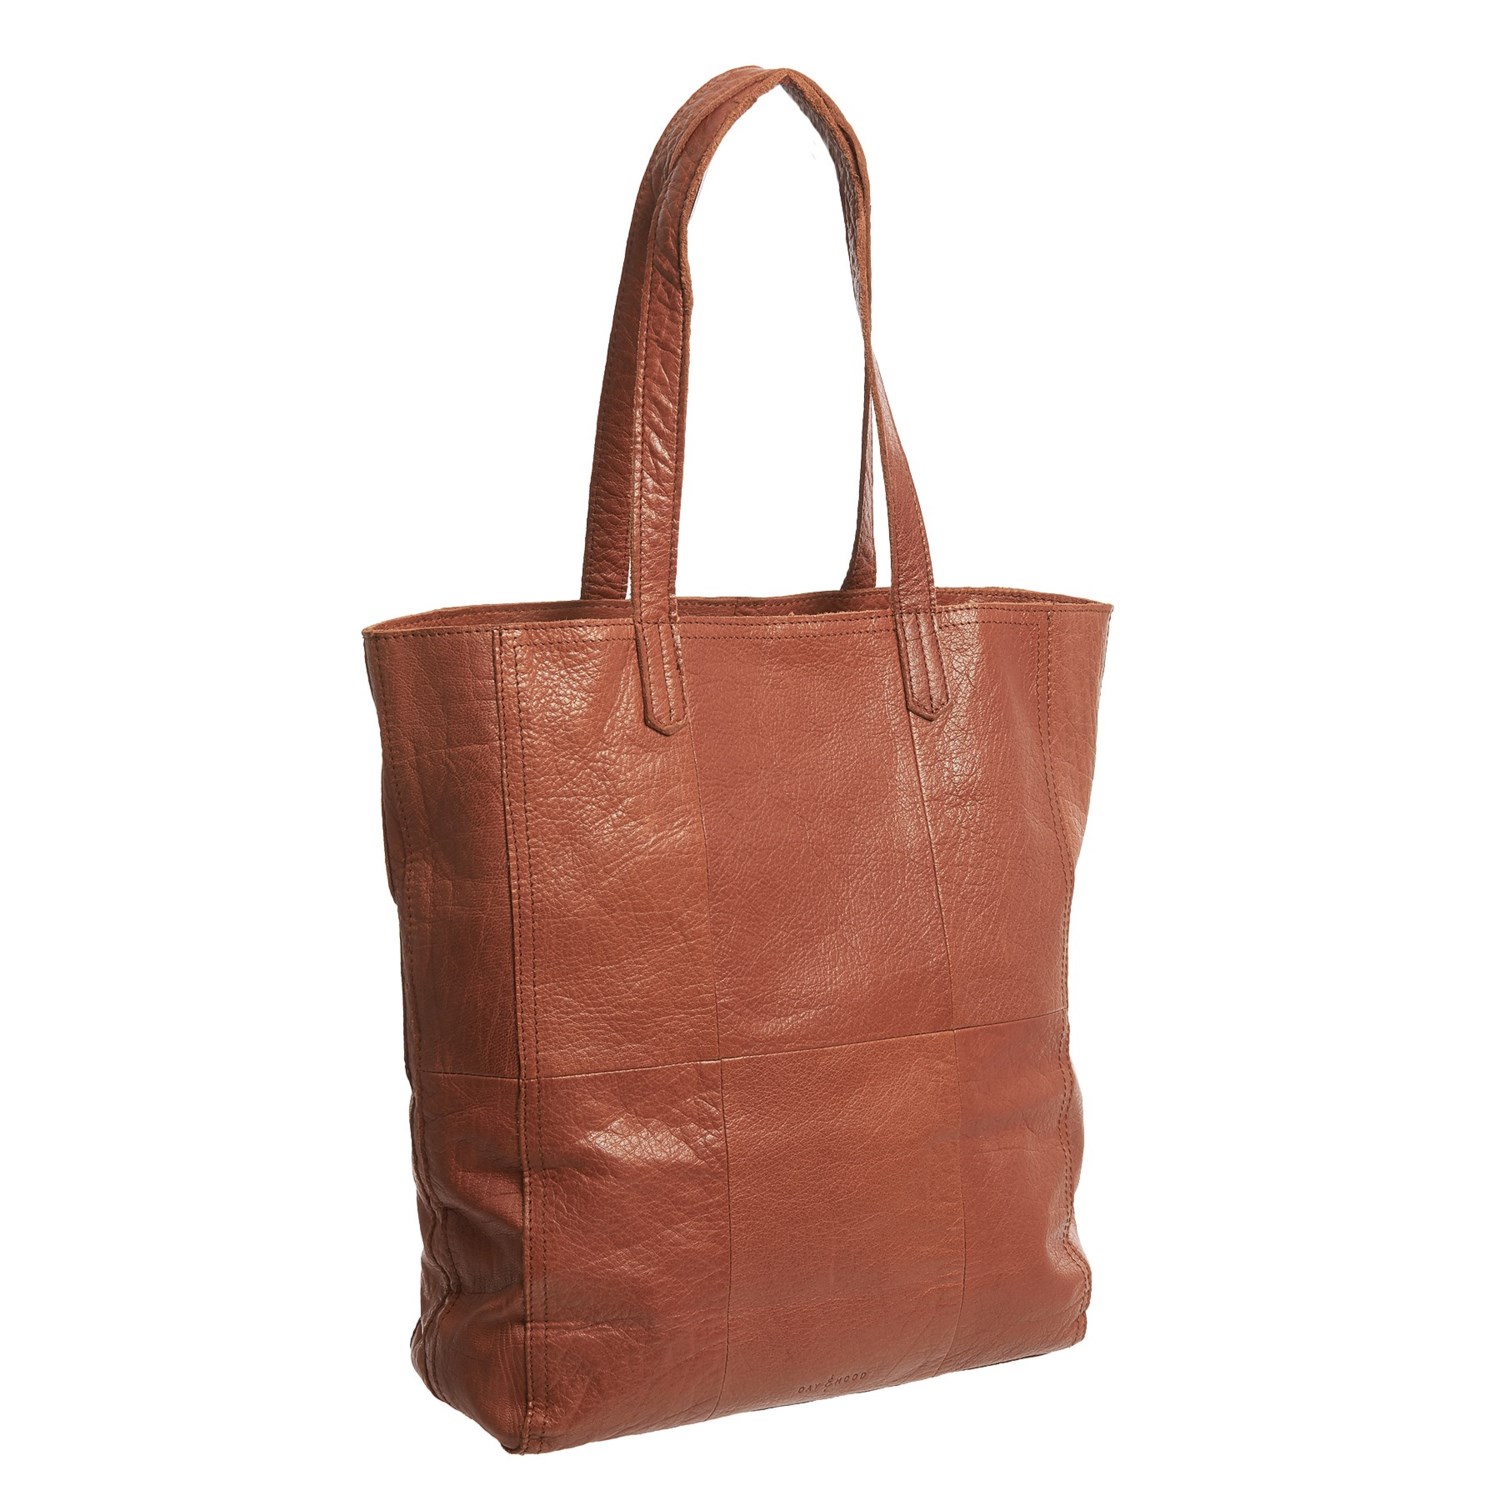 Day & Mood Heather Tote Bag (For Women) - Save 72%